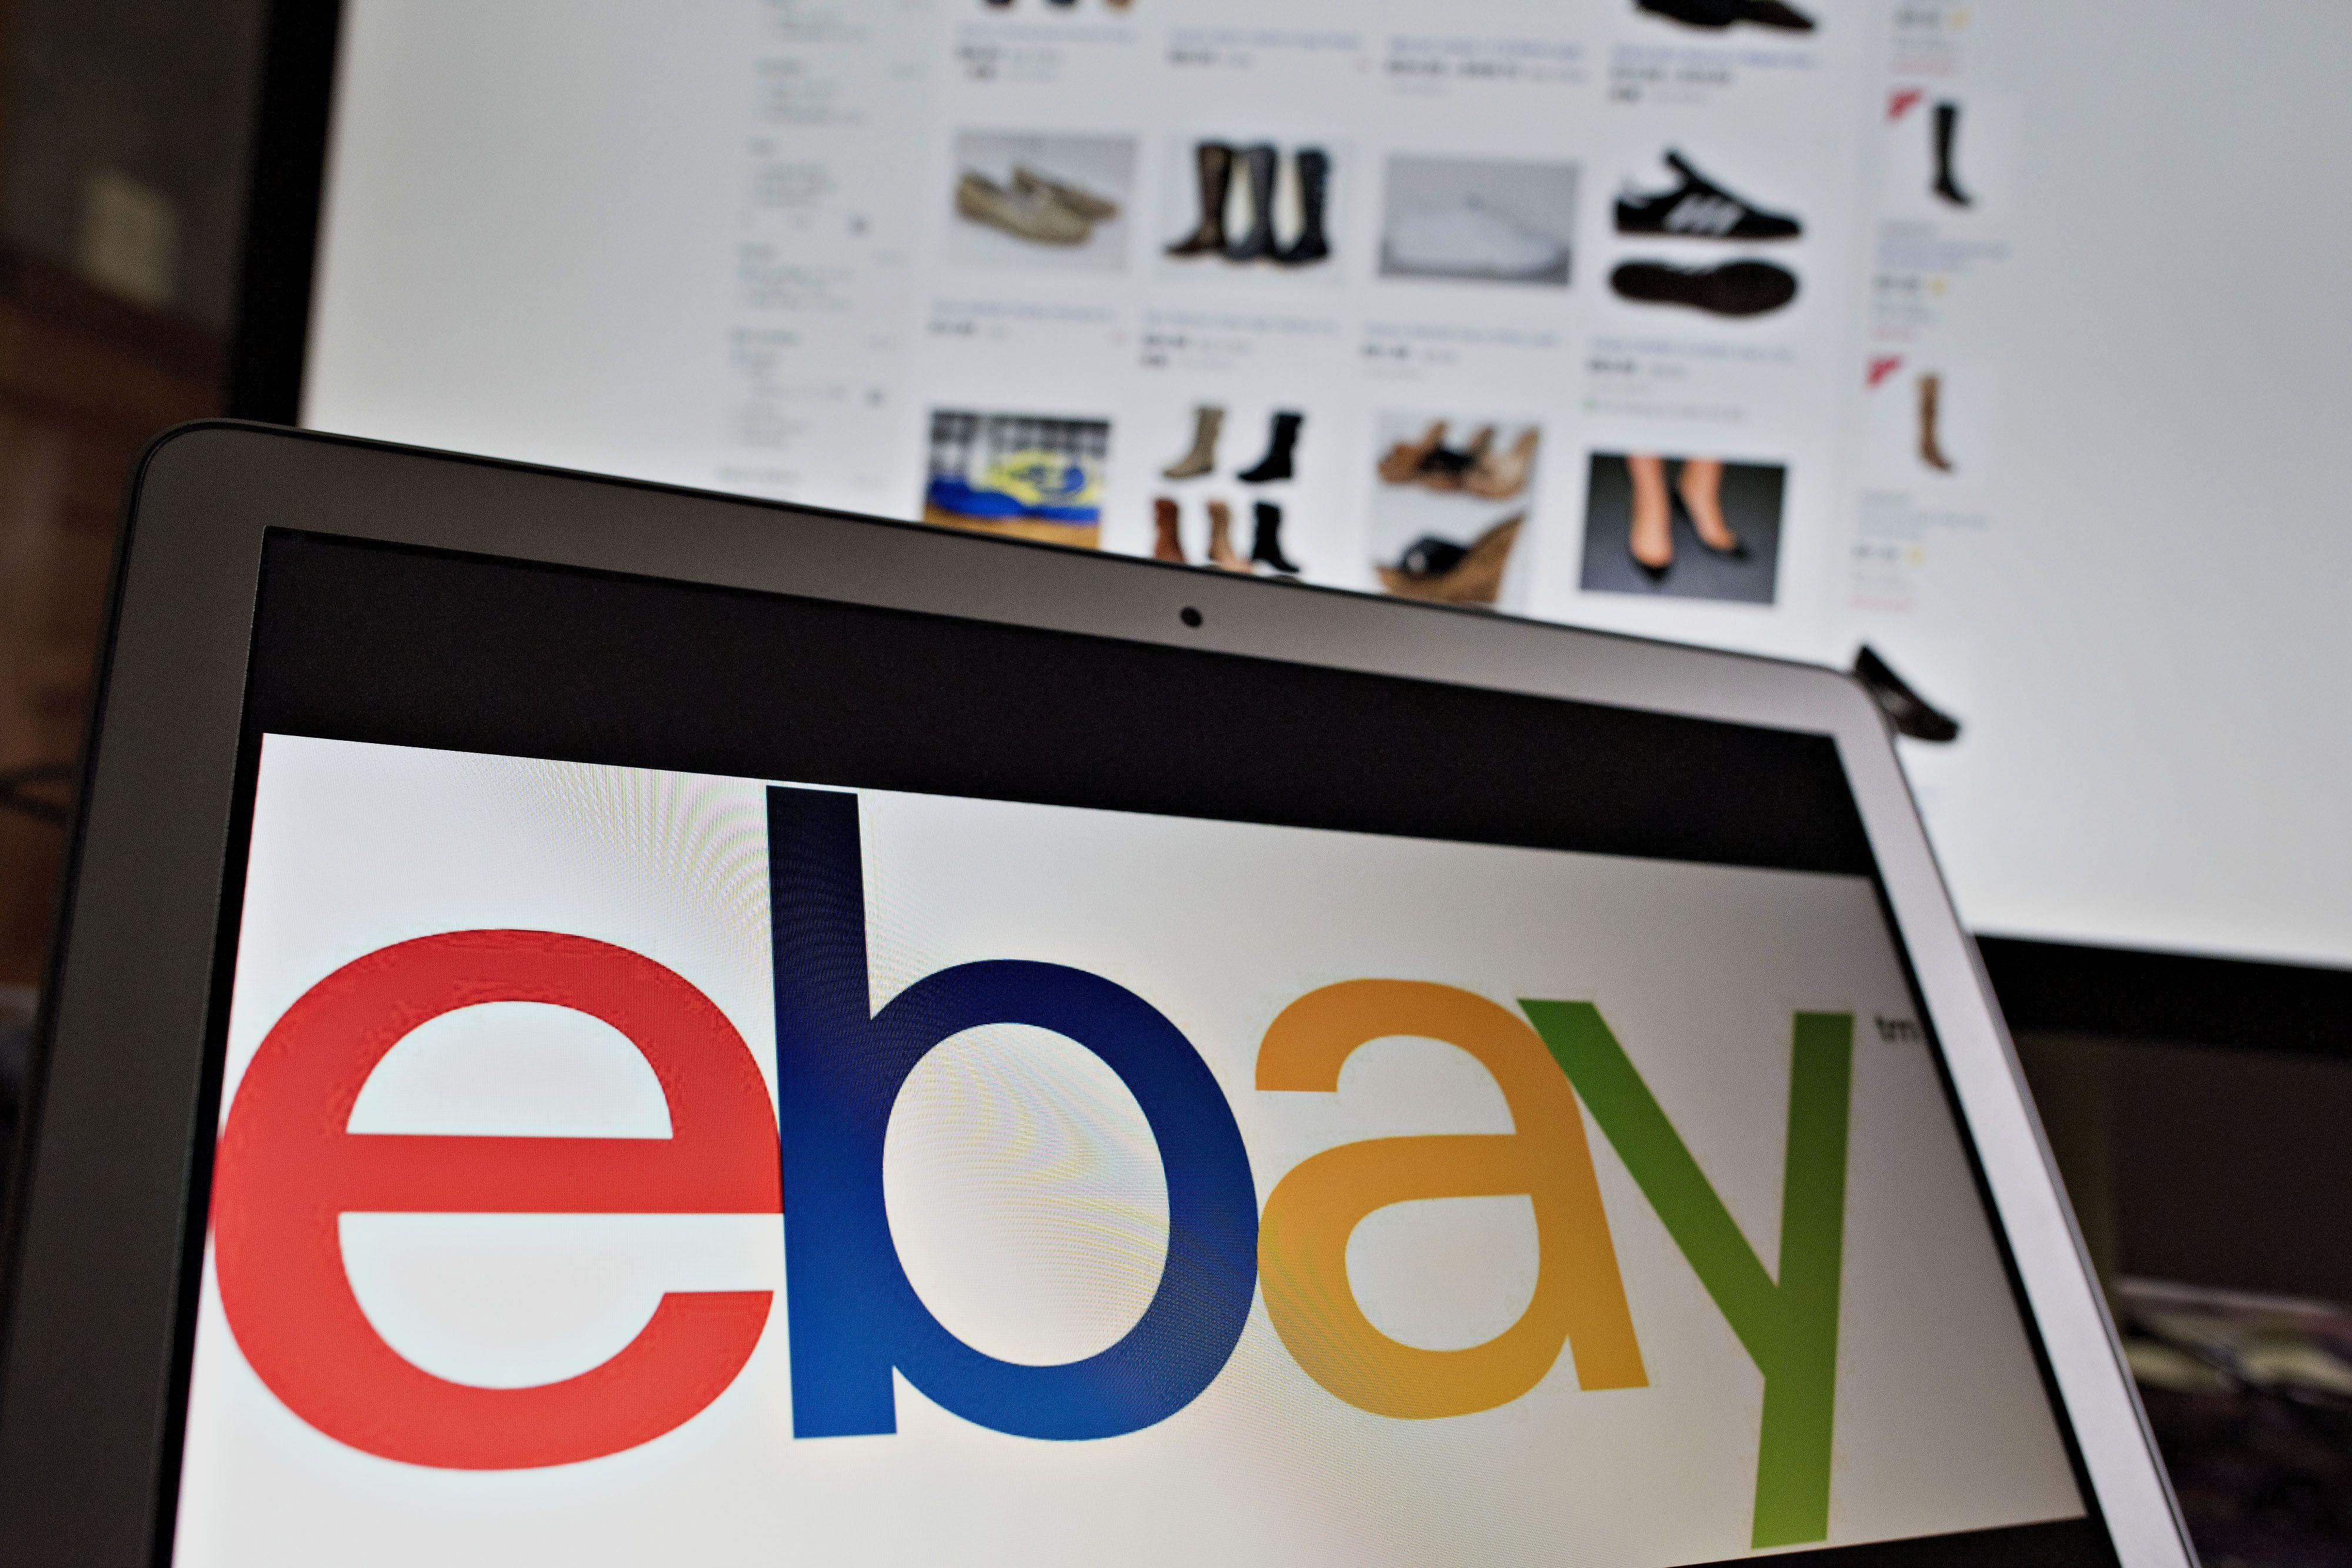 eBay App Logo - eBay: Using Mobile App Can Help Users Sell Items | Time